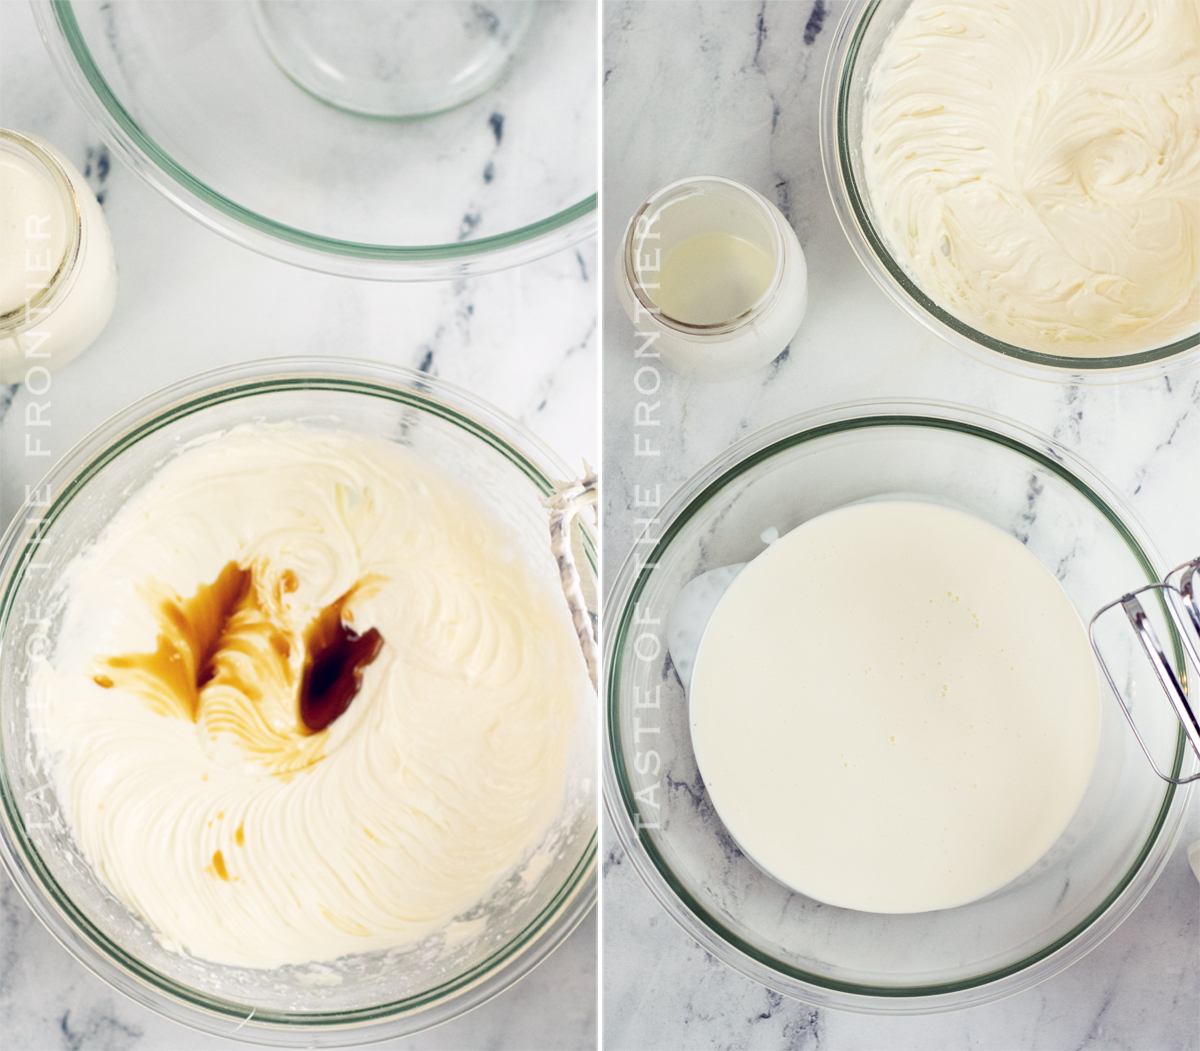 How to Make Whipped Topping